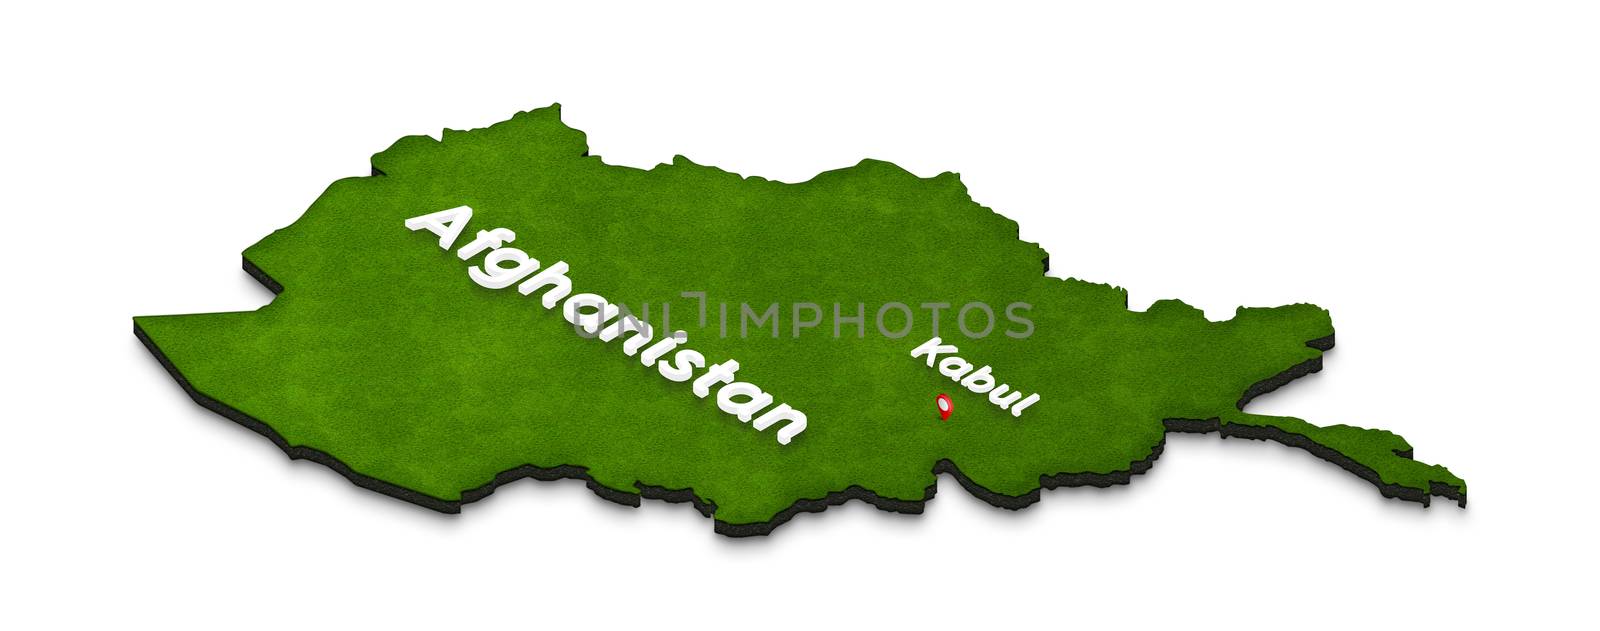 Illustration of a green ground map of Afghanistan on isolated background. Left 3D isometric perspective projection with the name of country and capital Kabul.